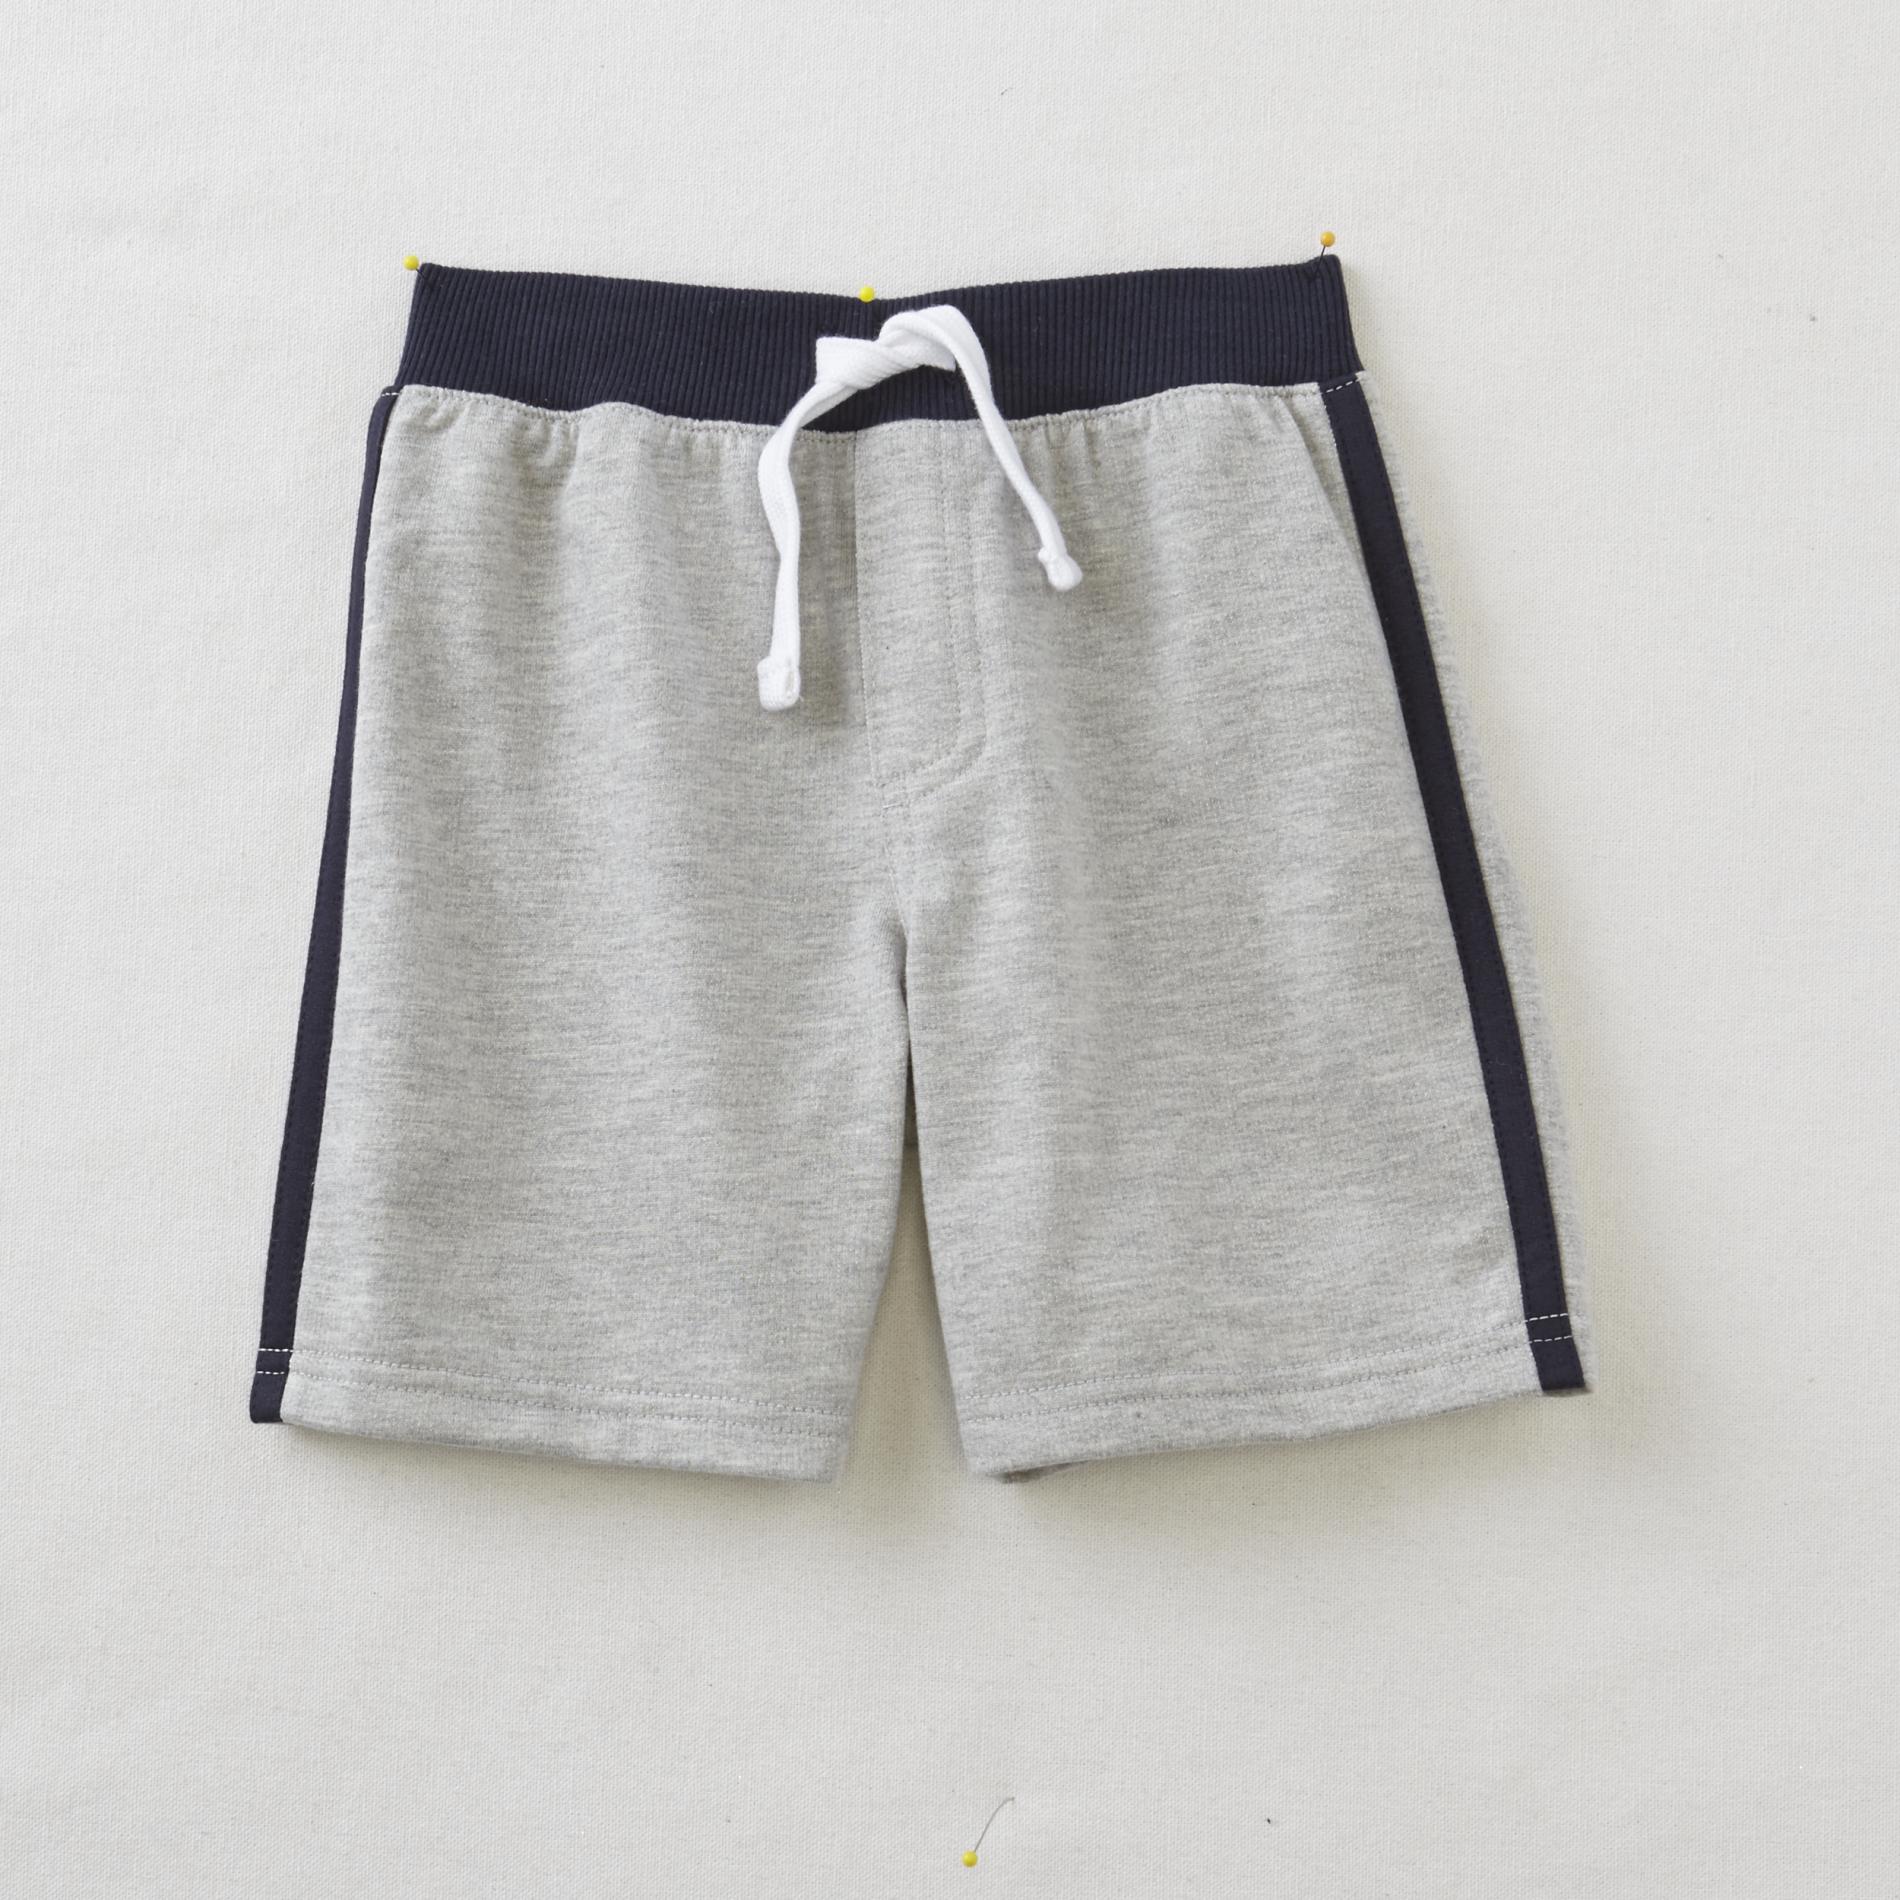 Toughskins Infant & Toddler Boys' French Terry Shorts